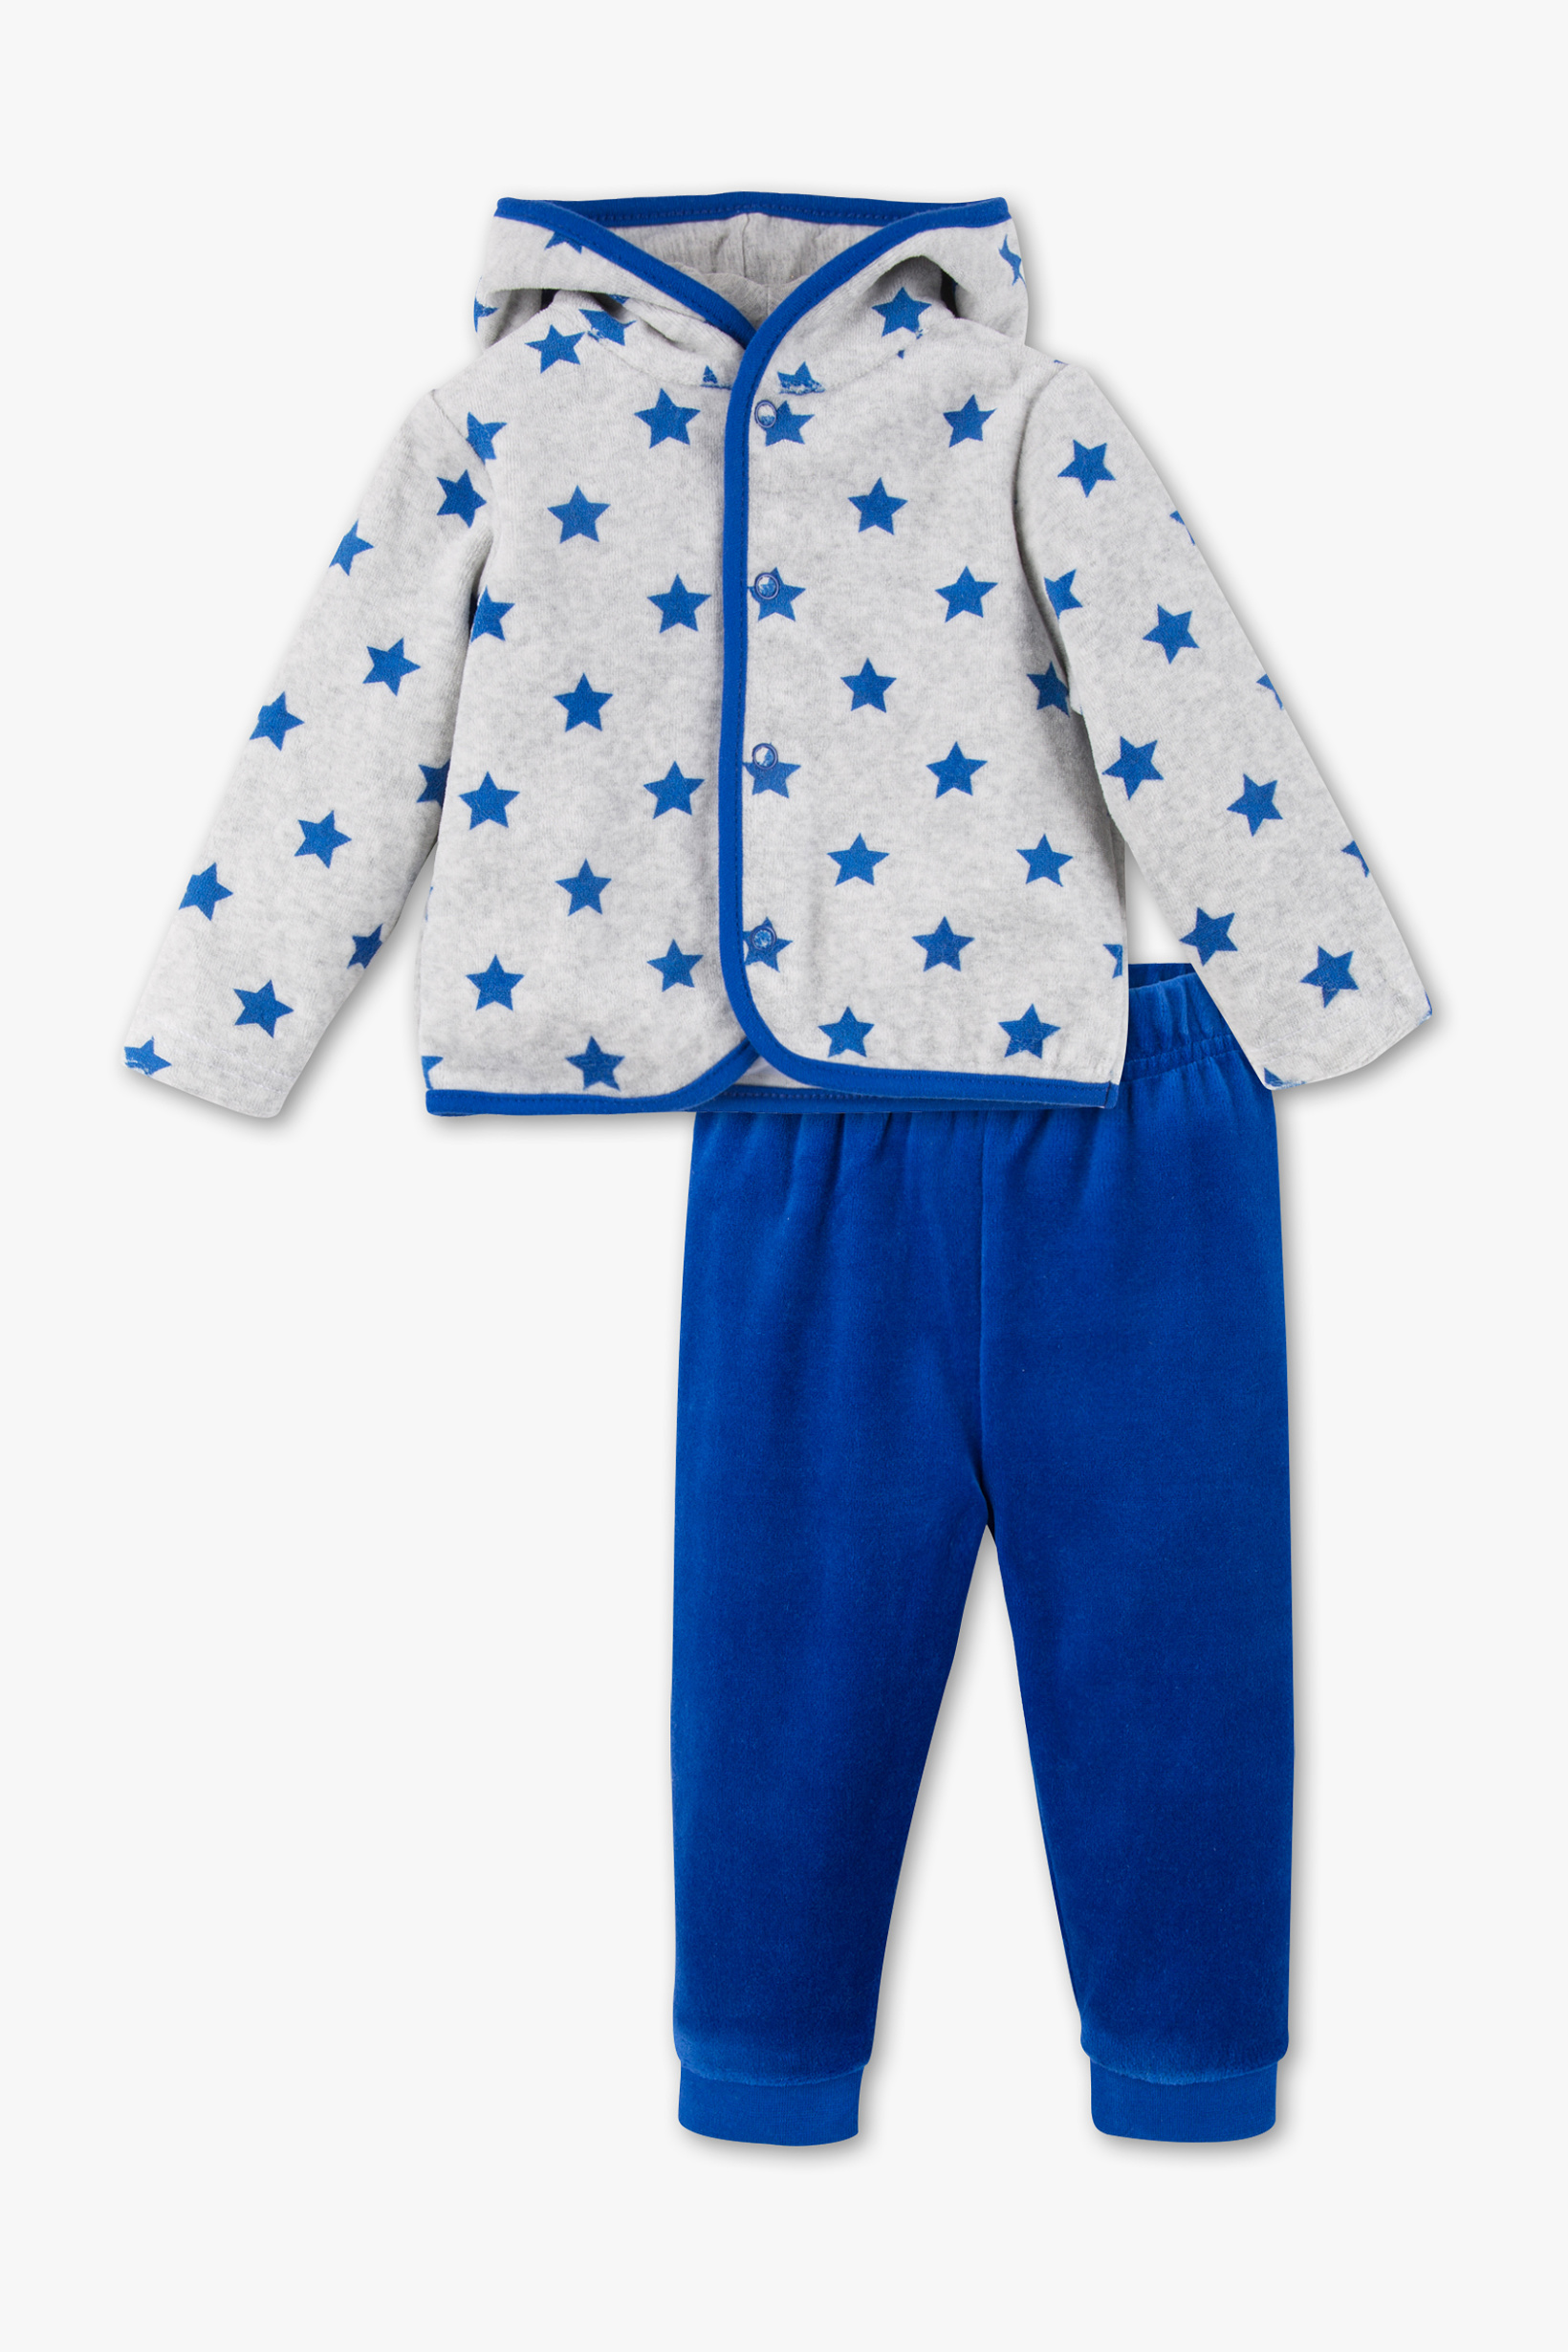 Baby Club Babyoutfit 2-delig